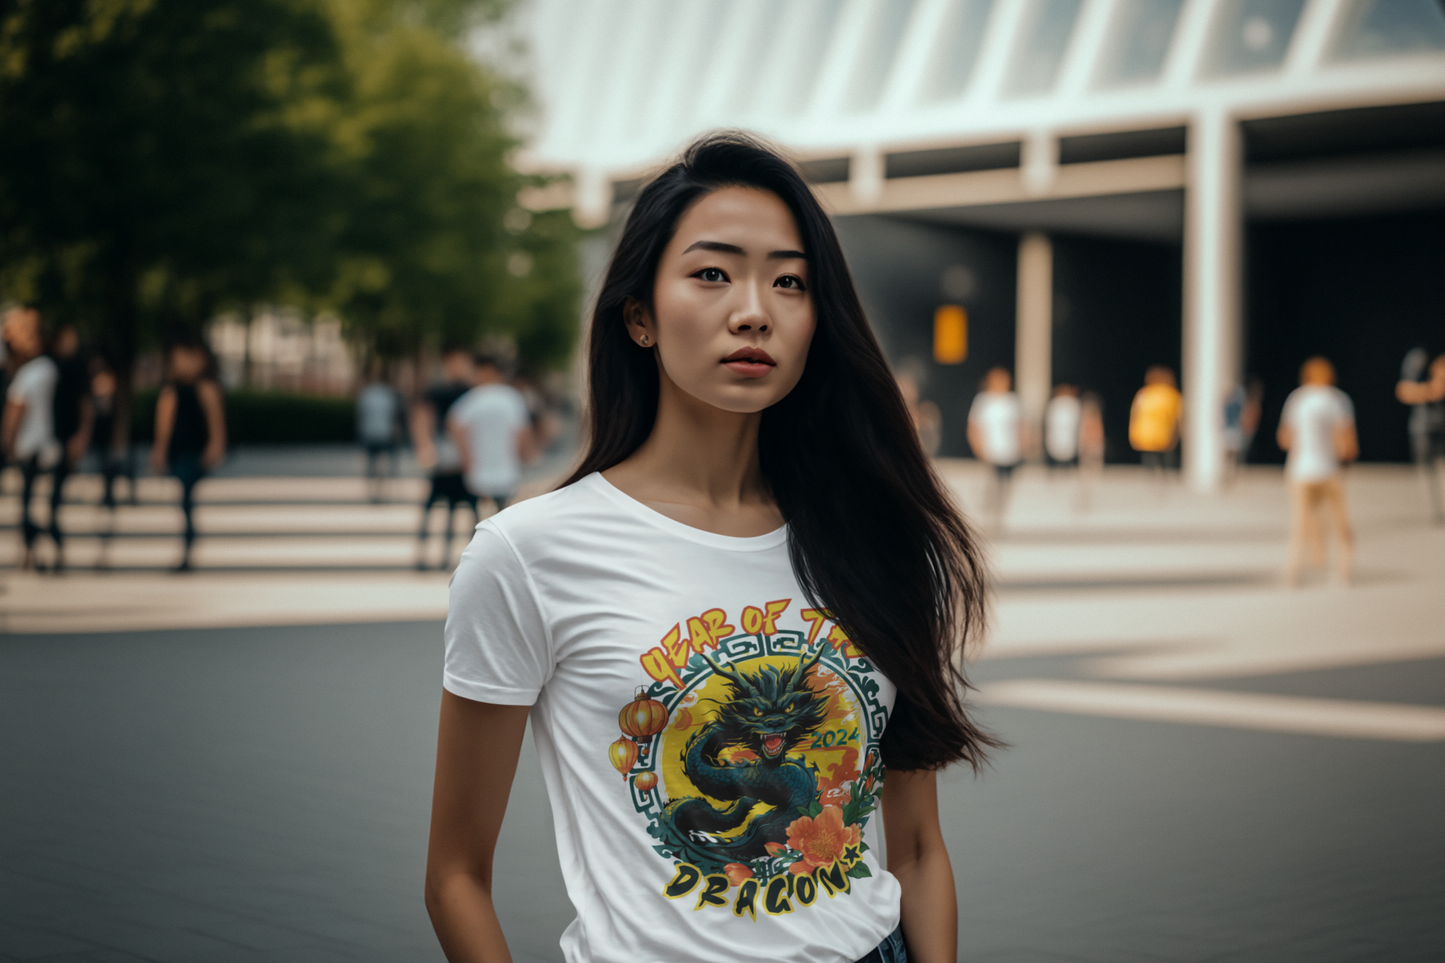 Year of the "Dragon" Women's Fitted T-Shirt